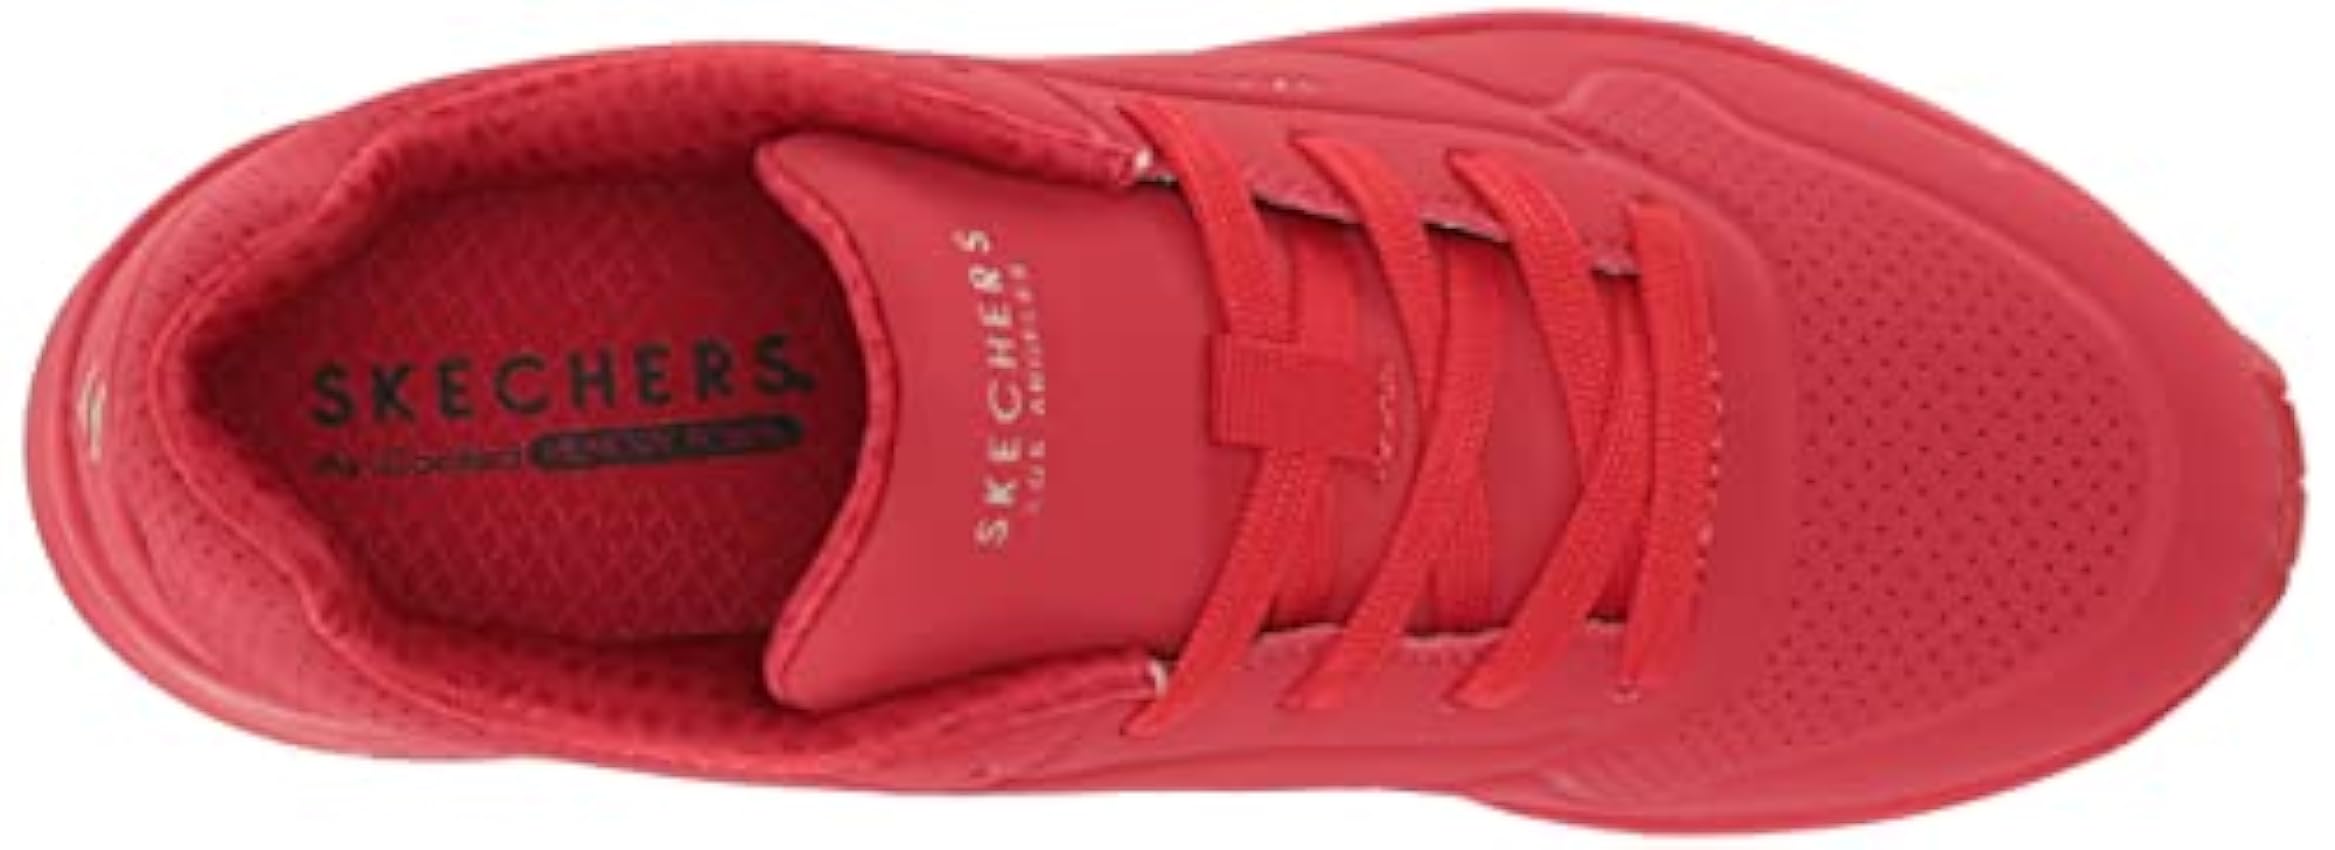 Skechers Fille Sneakers,Sports Shoes rIgHK8DT